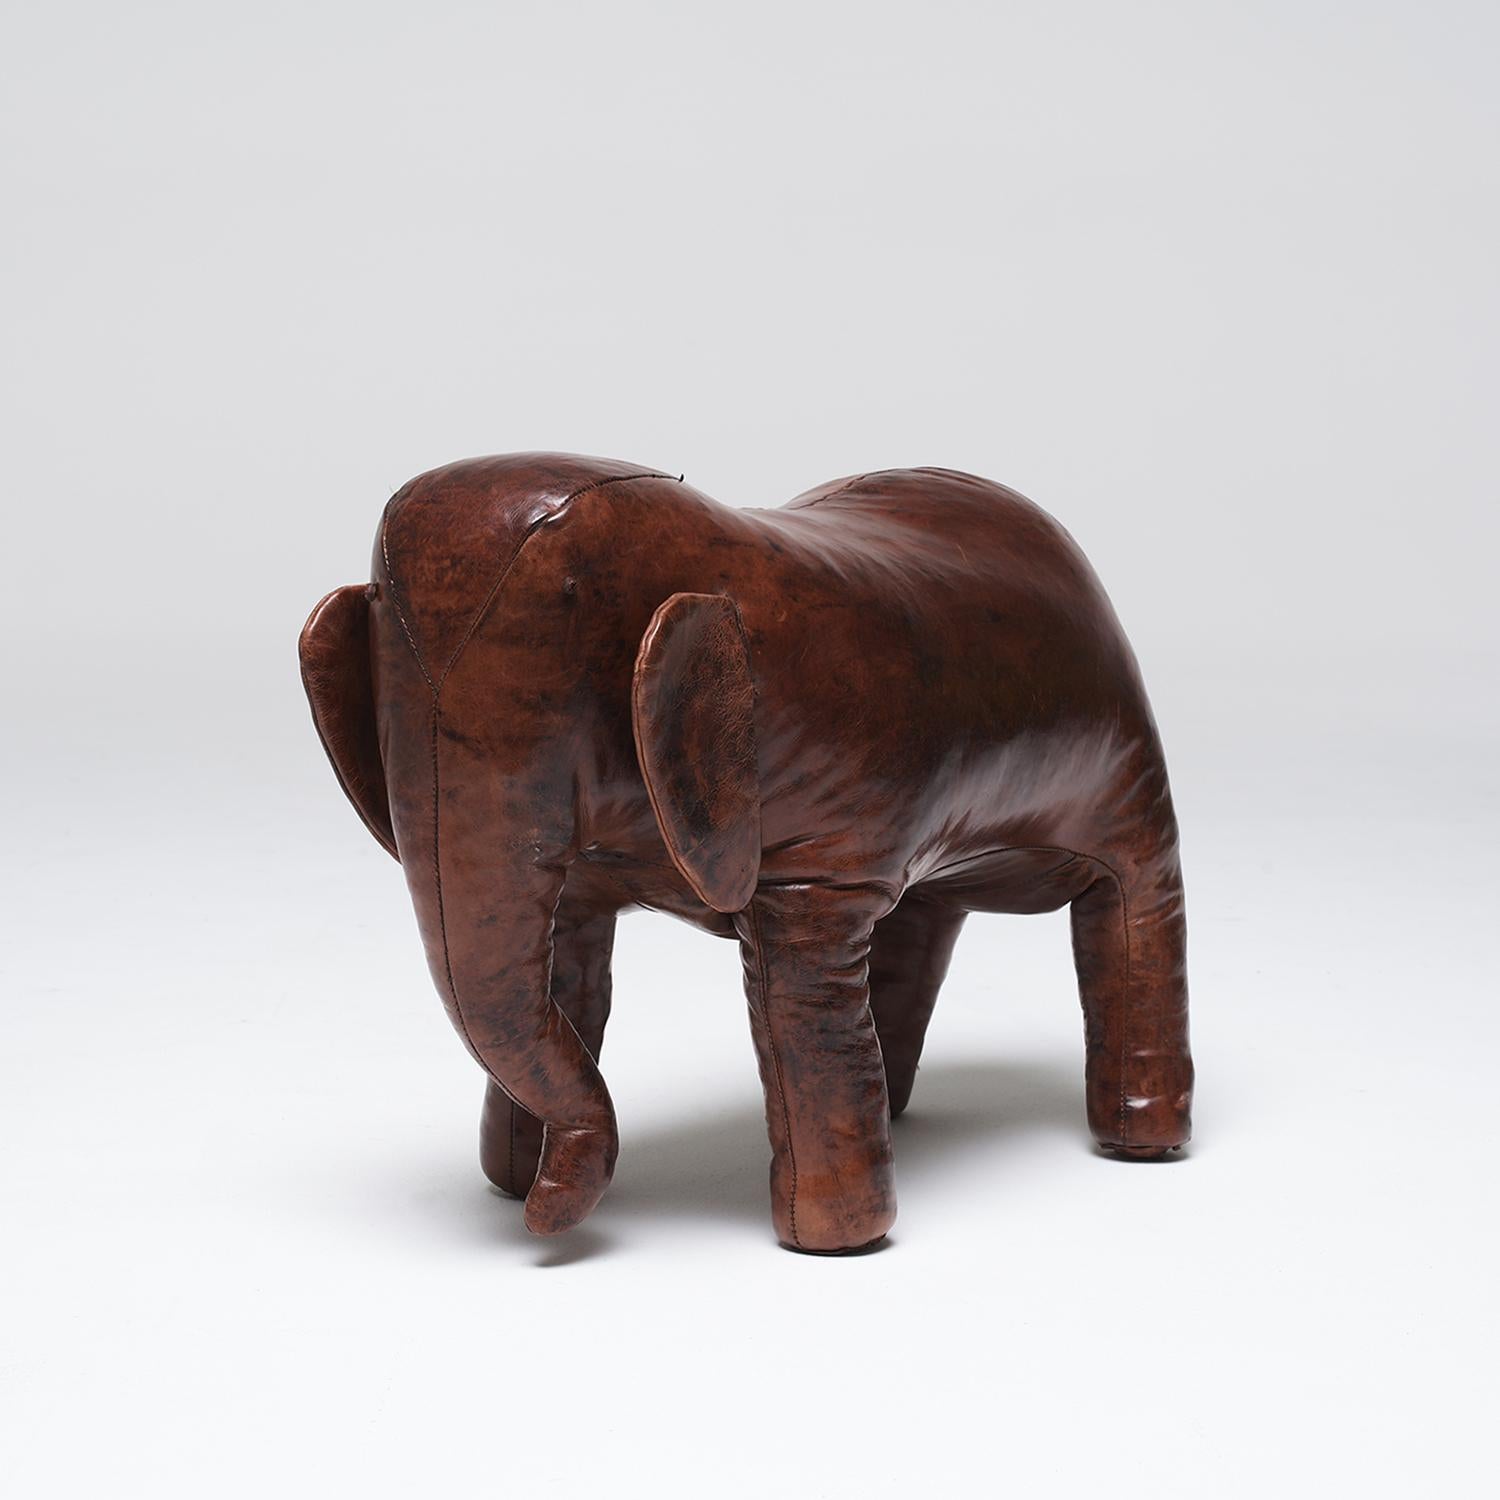 20th Century English Vintage Elephant Footstool in Leather by Dimitri Omersa For Sale 3